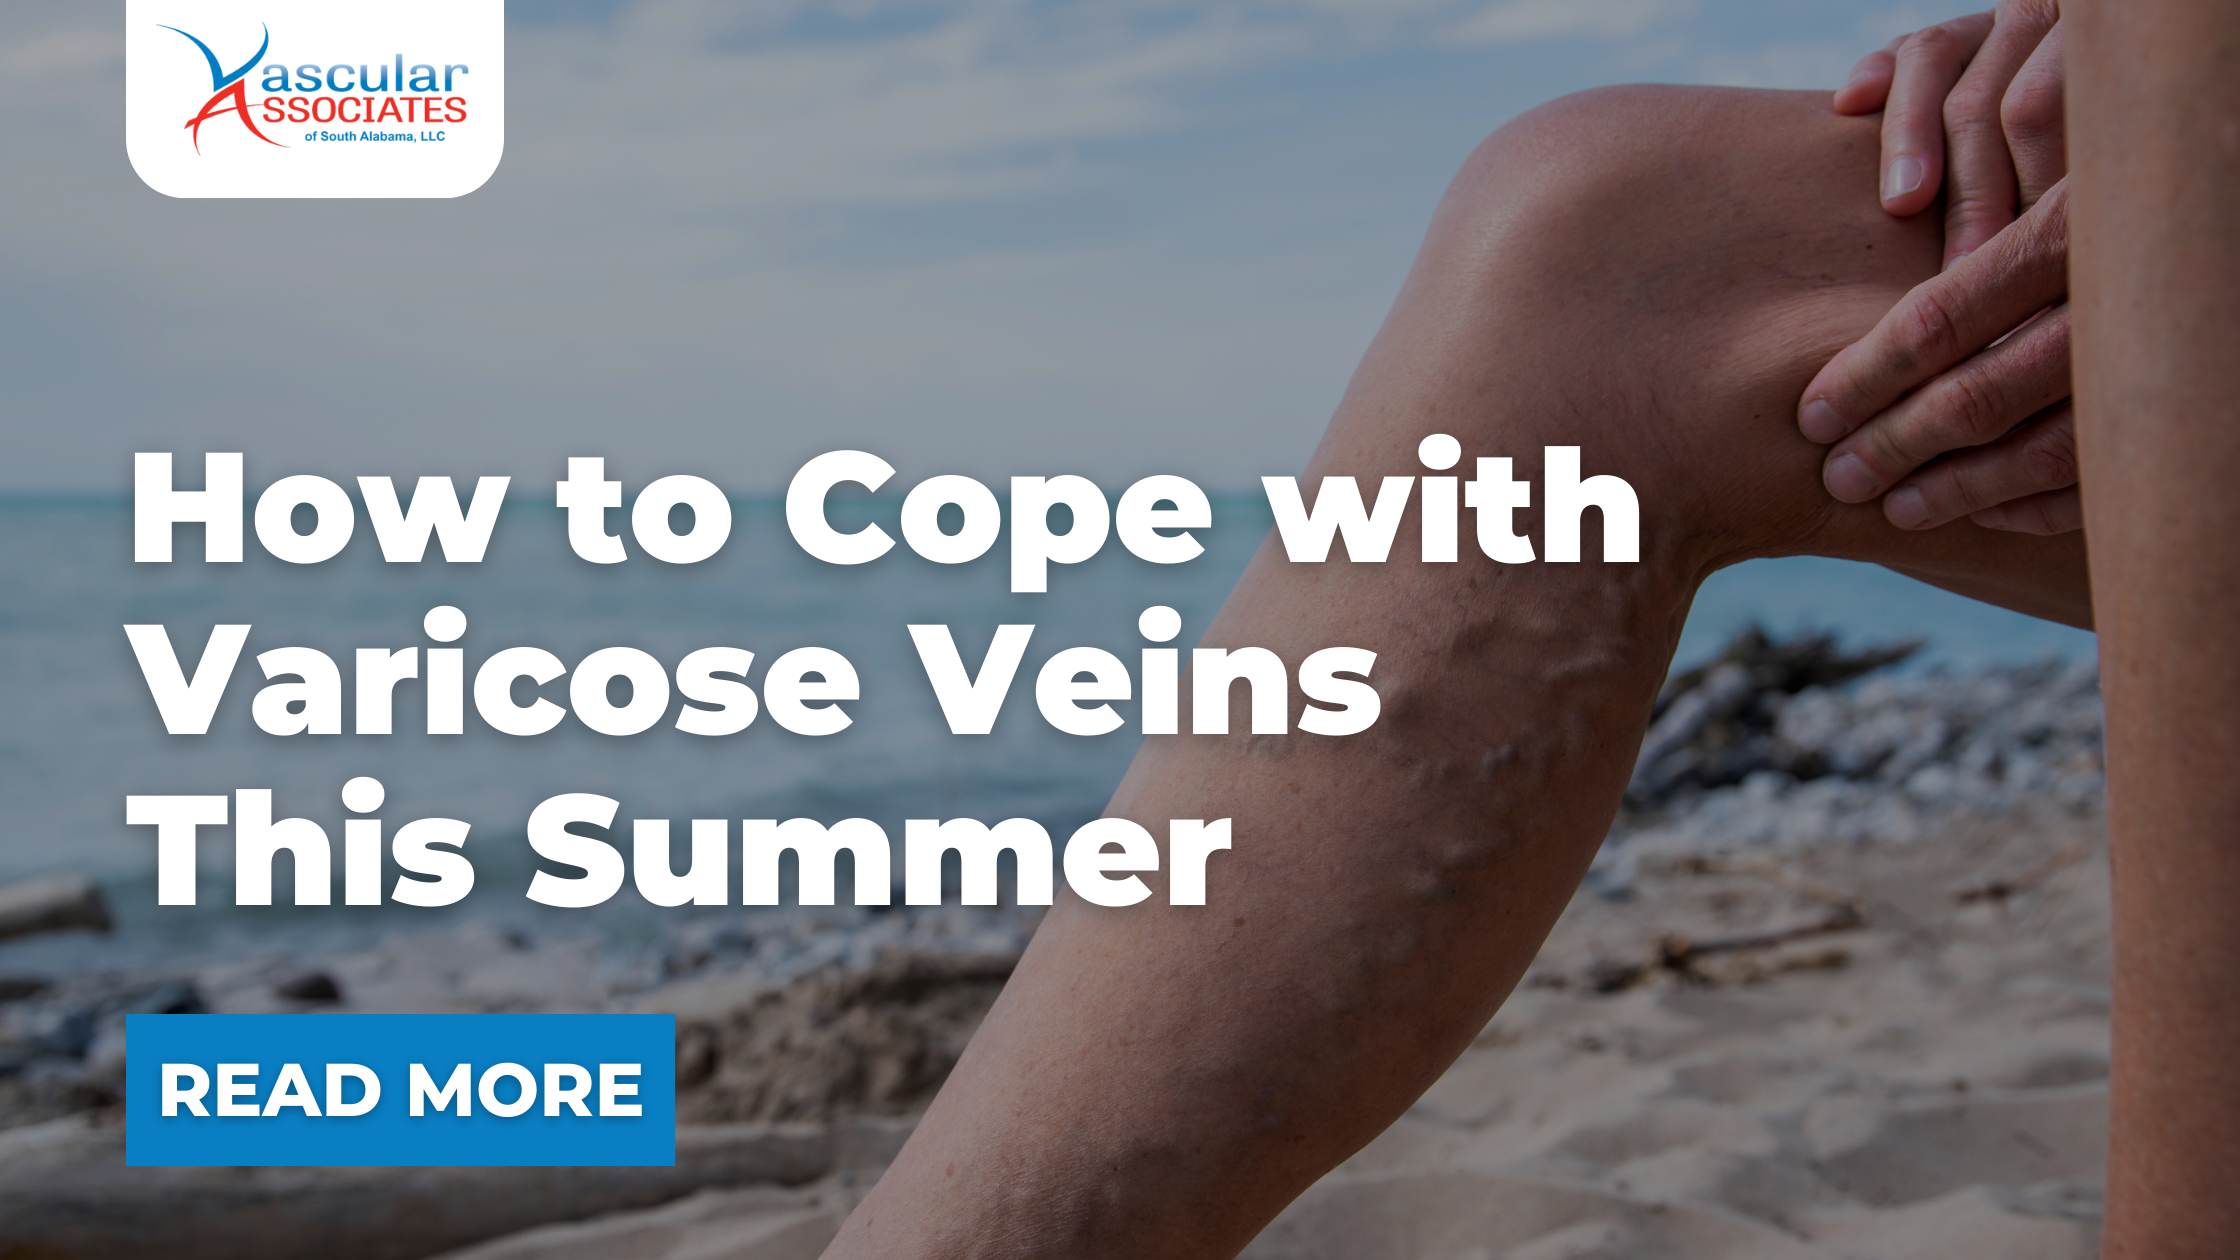 Vascular Blog - How to Cope with Varicose Veins This Summer.png